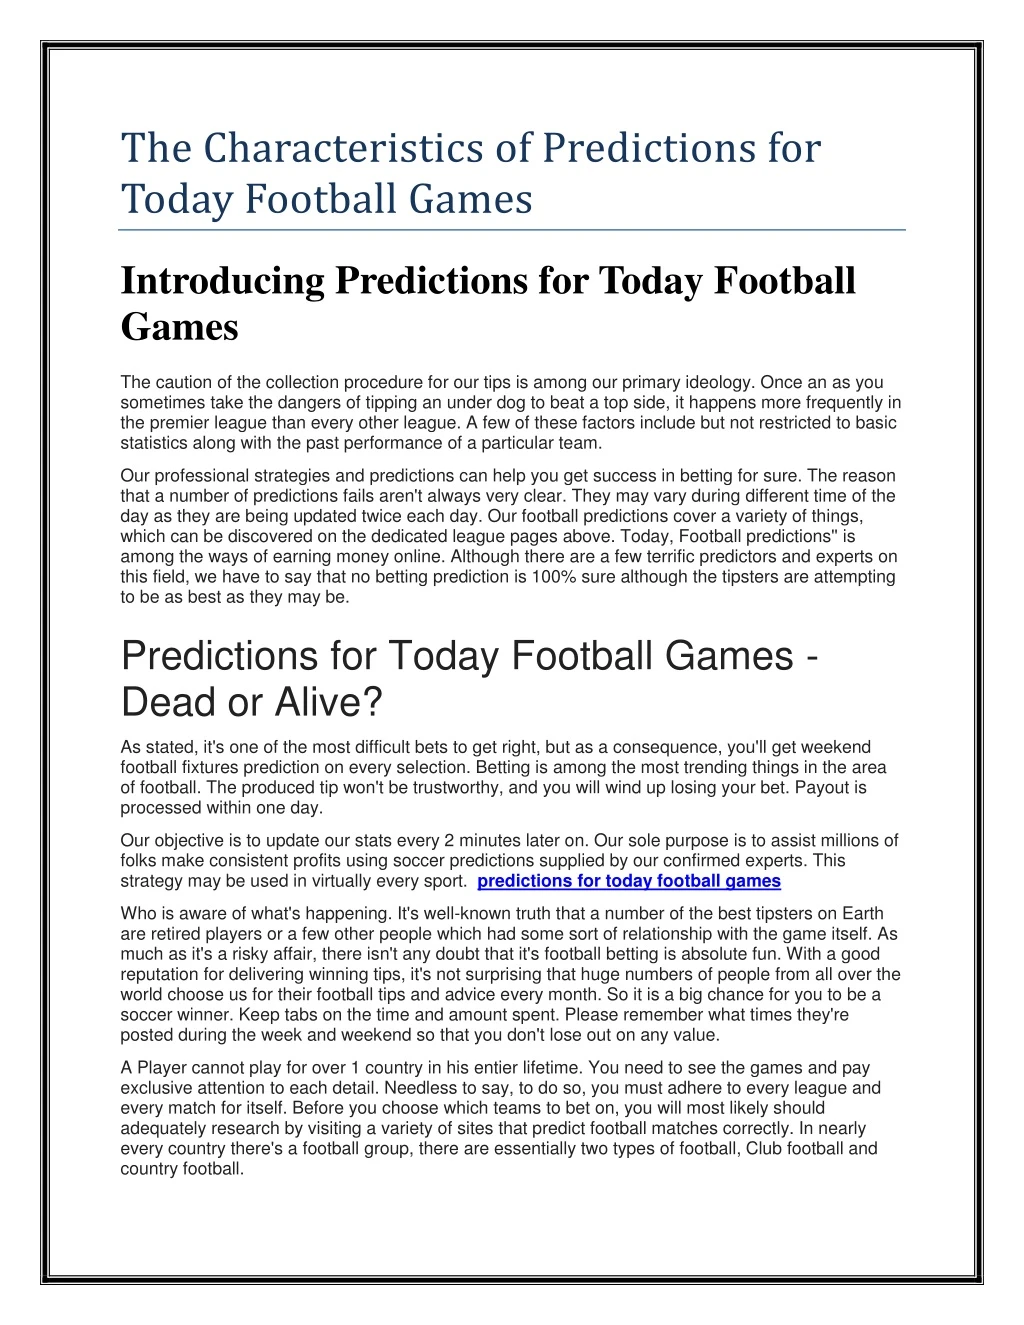 the characteristics of predictions for today